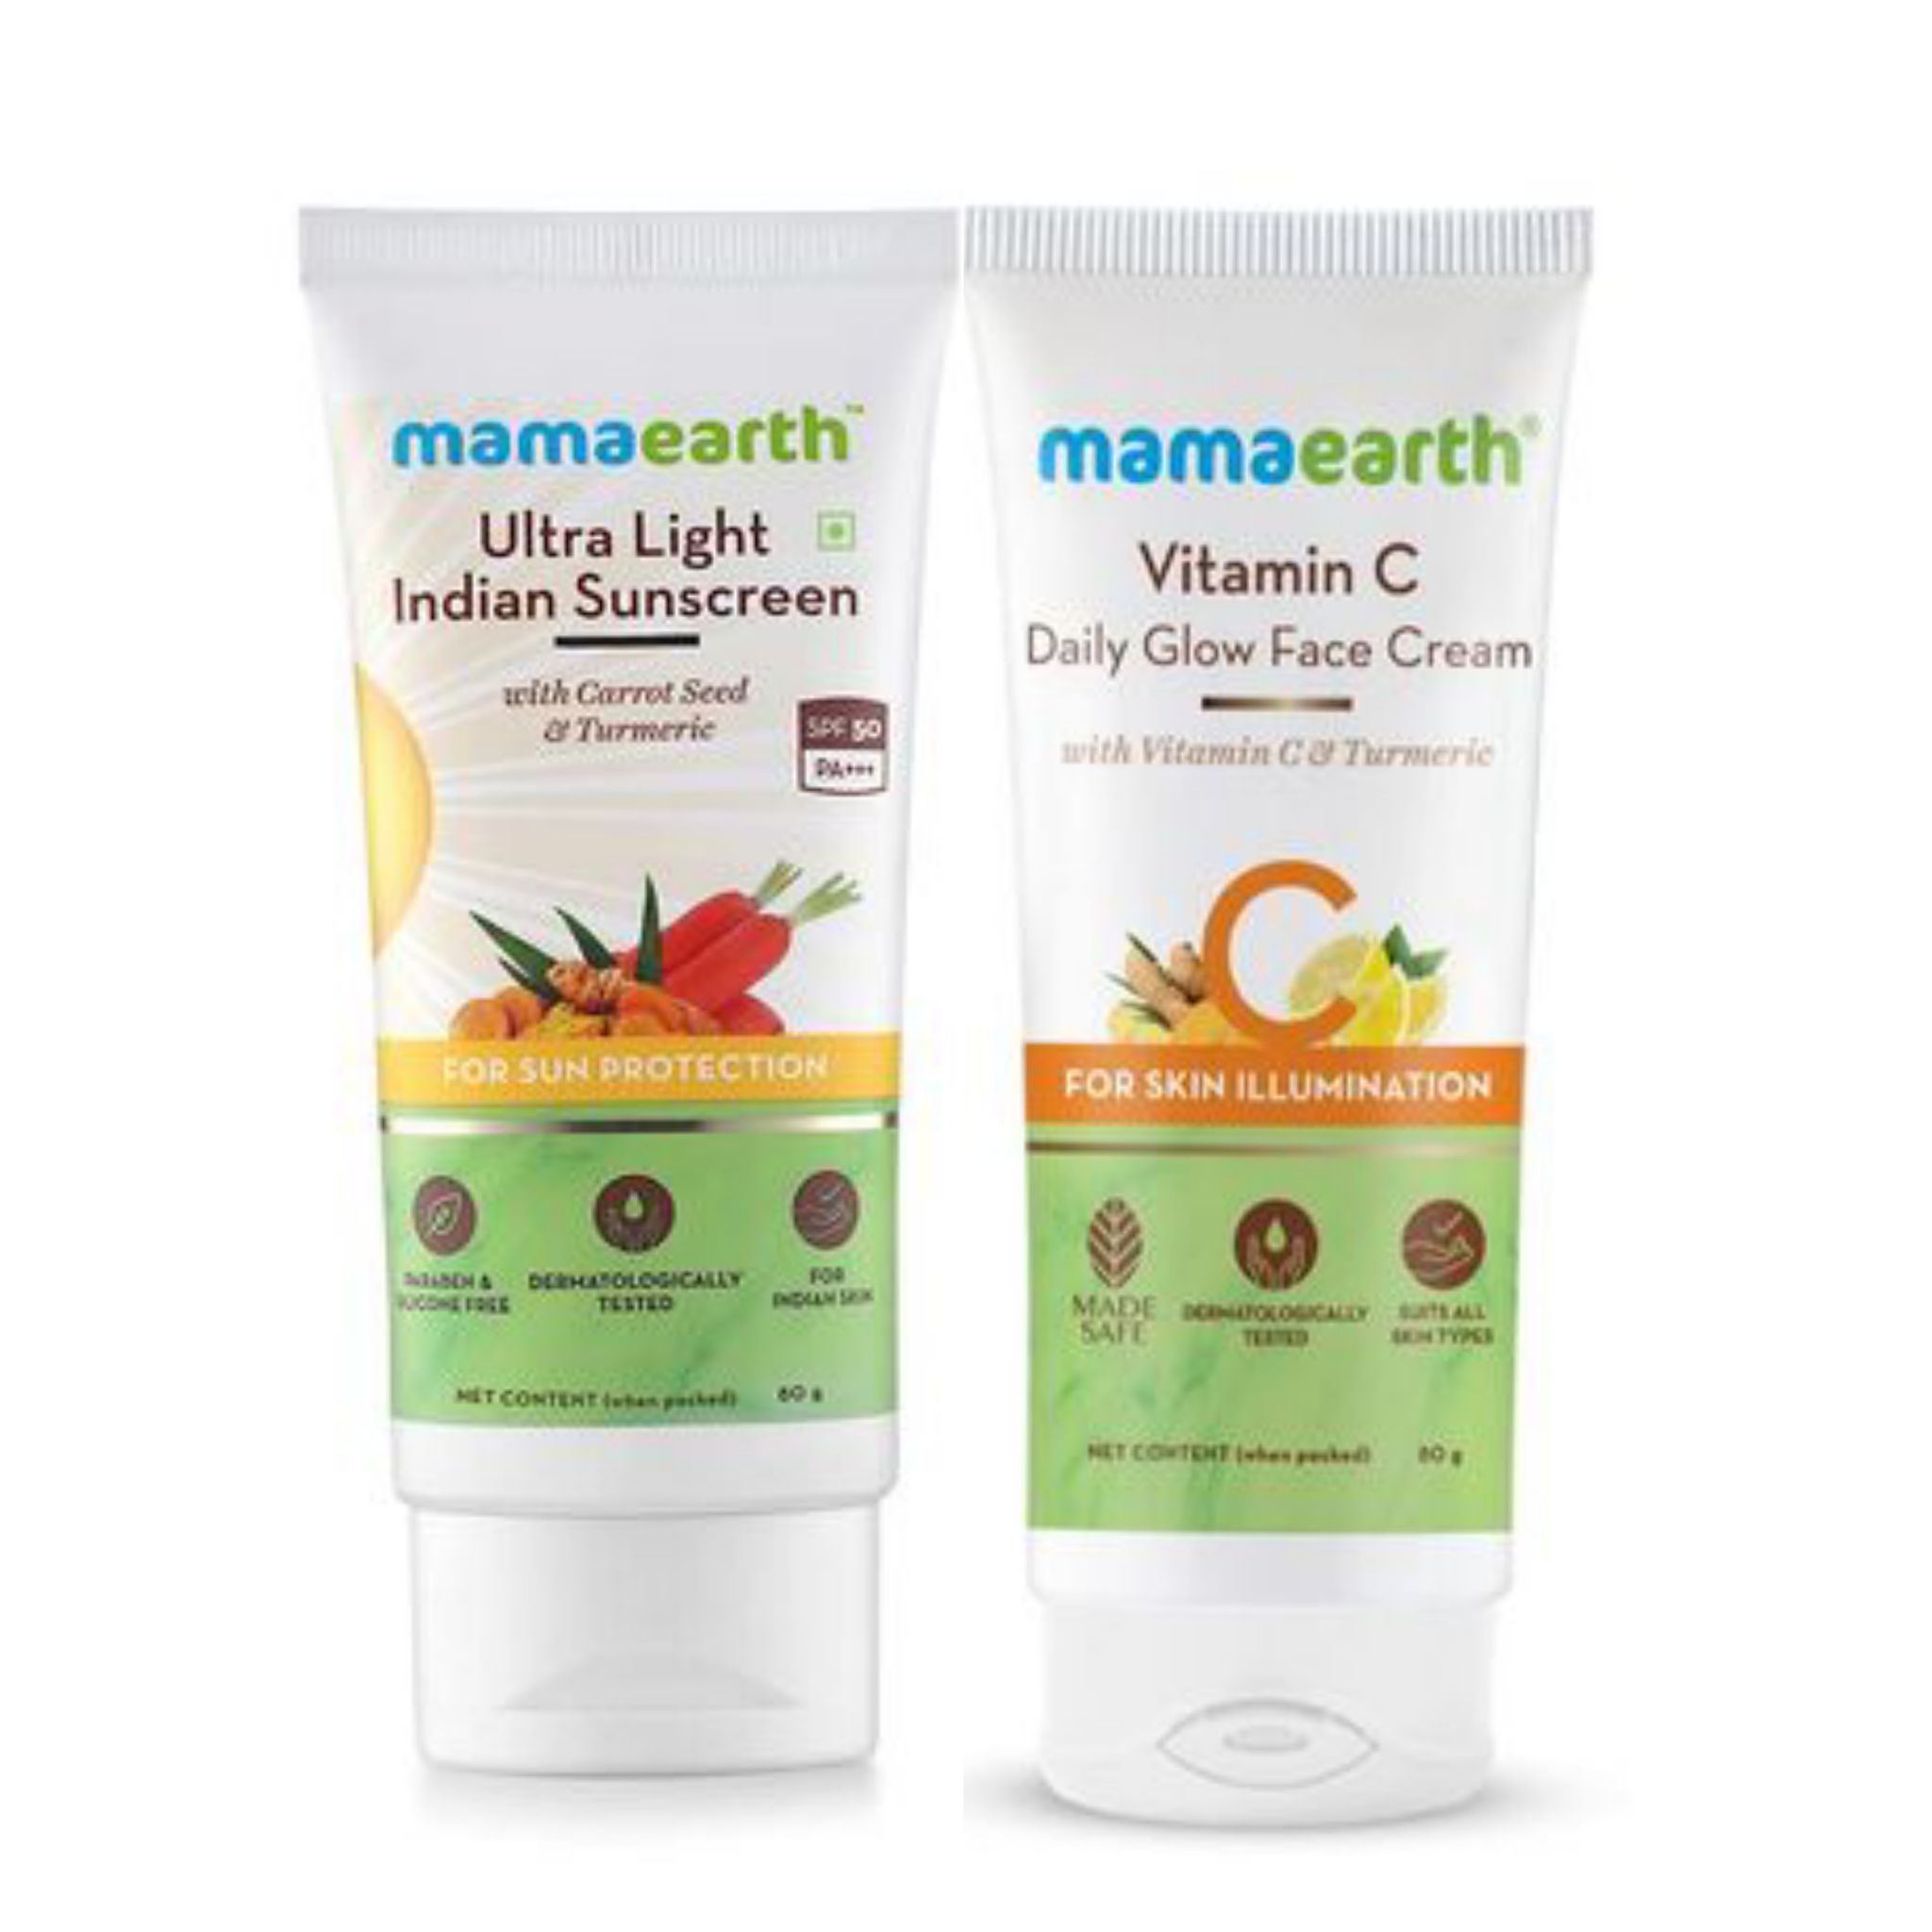 Mamaearth Ultra Light Indian Sunscreen SPF50 PA+++ (80 gm) + Mamaearth Vitamin C Daily Glow Face Cream(80gm) Combo Pack of 2